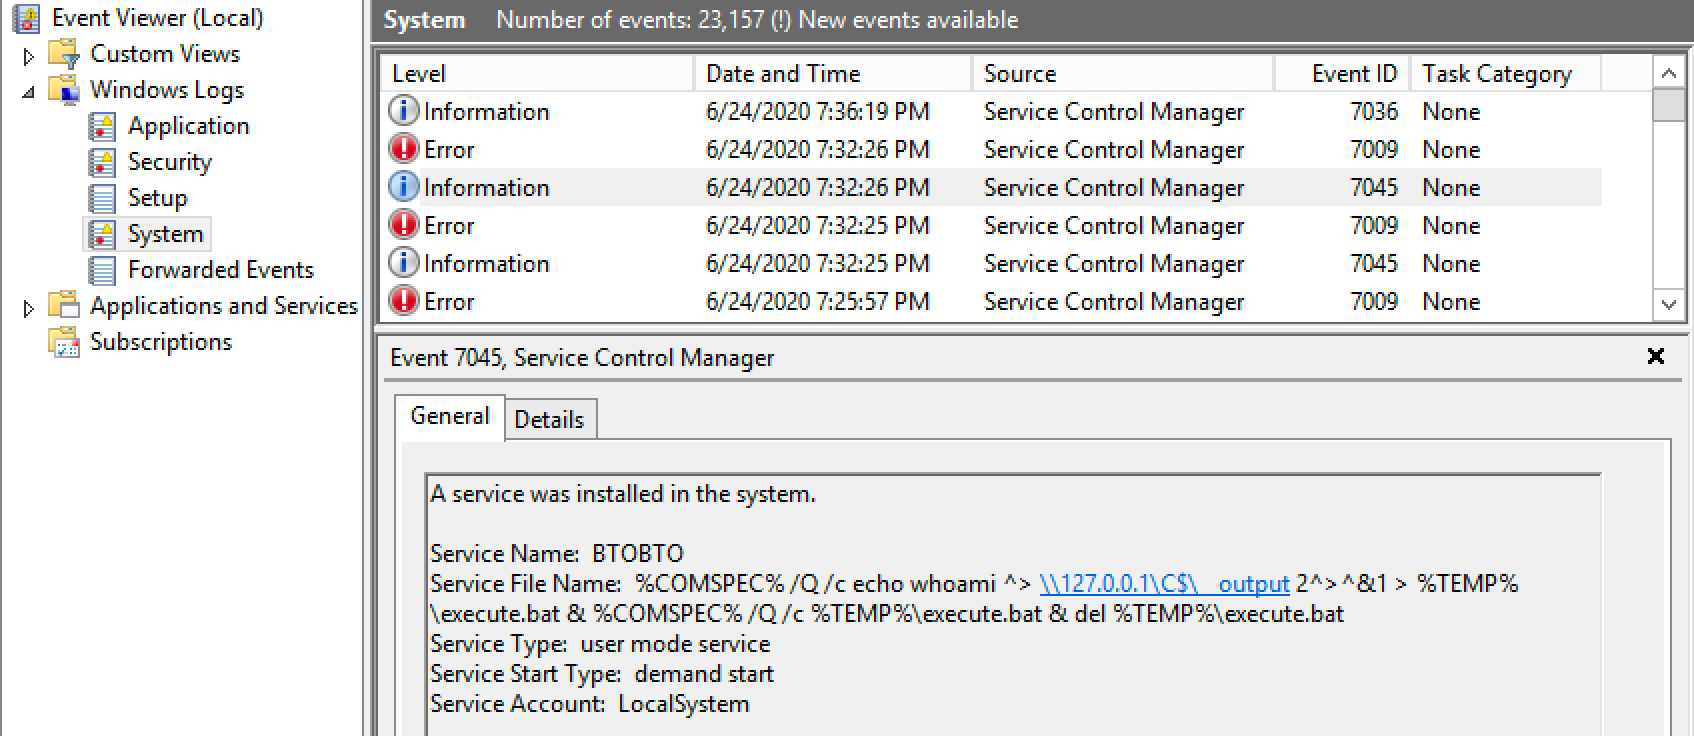 Opening up our old friend Event Viewer on the remote host